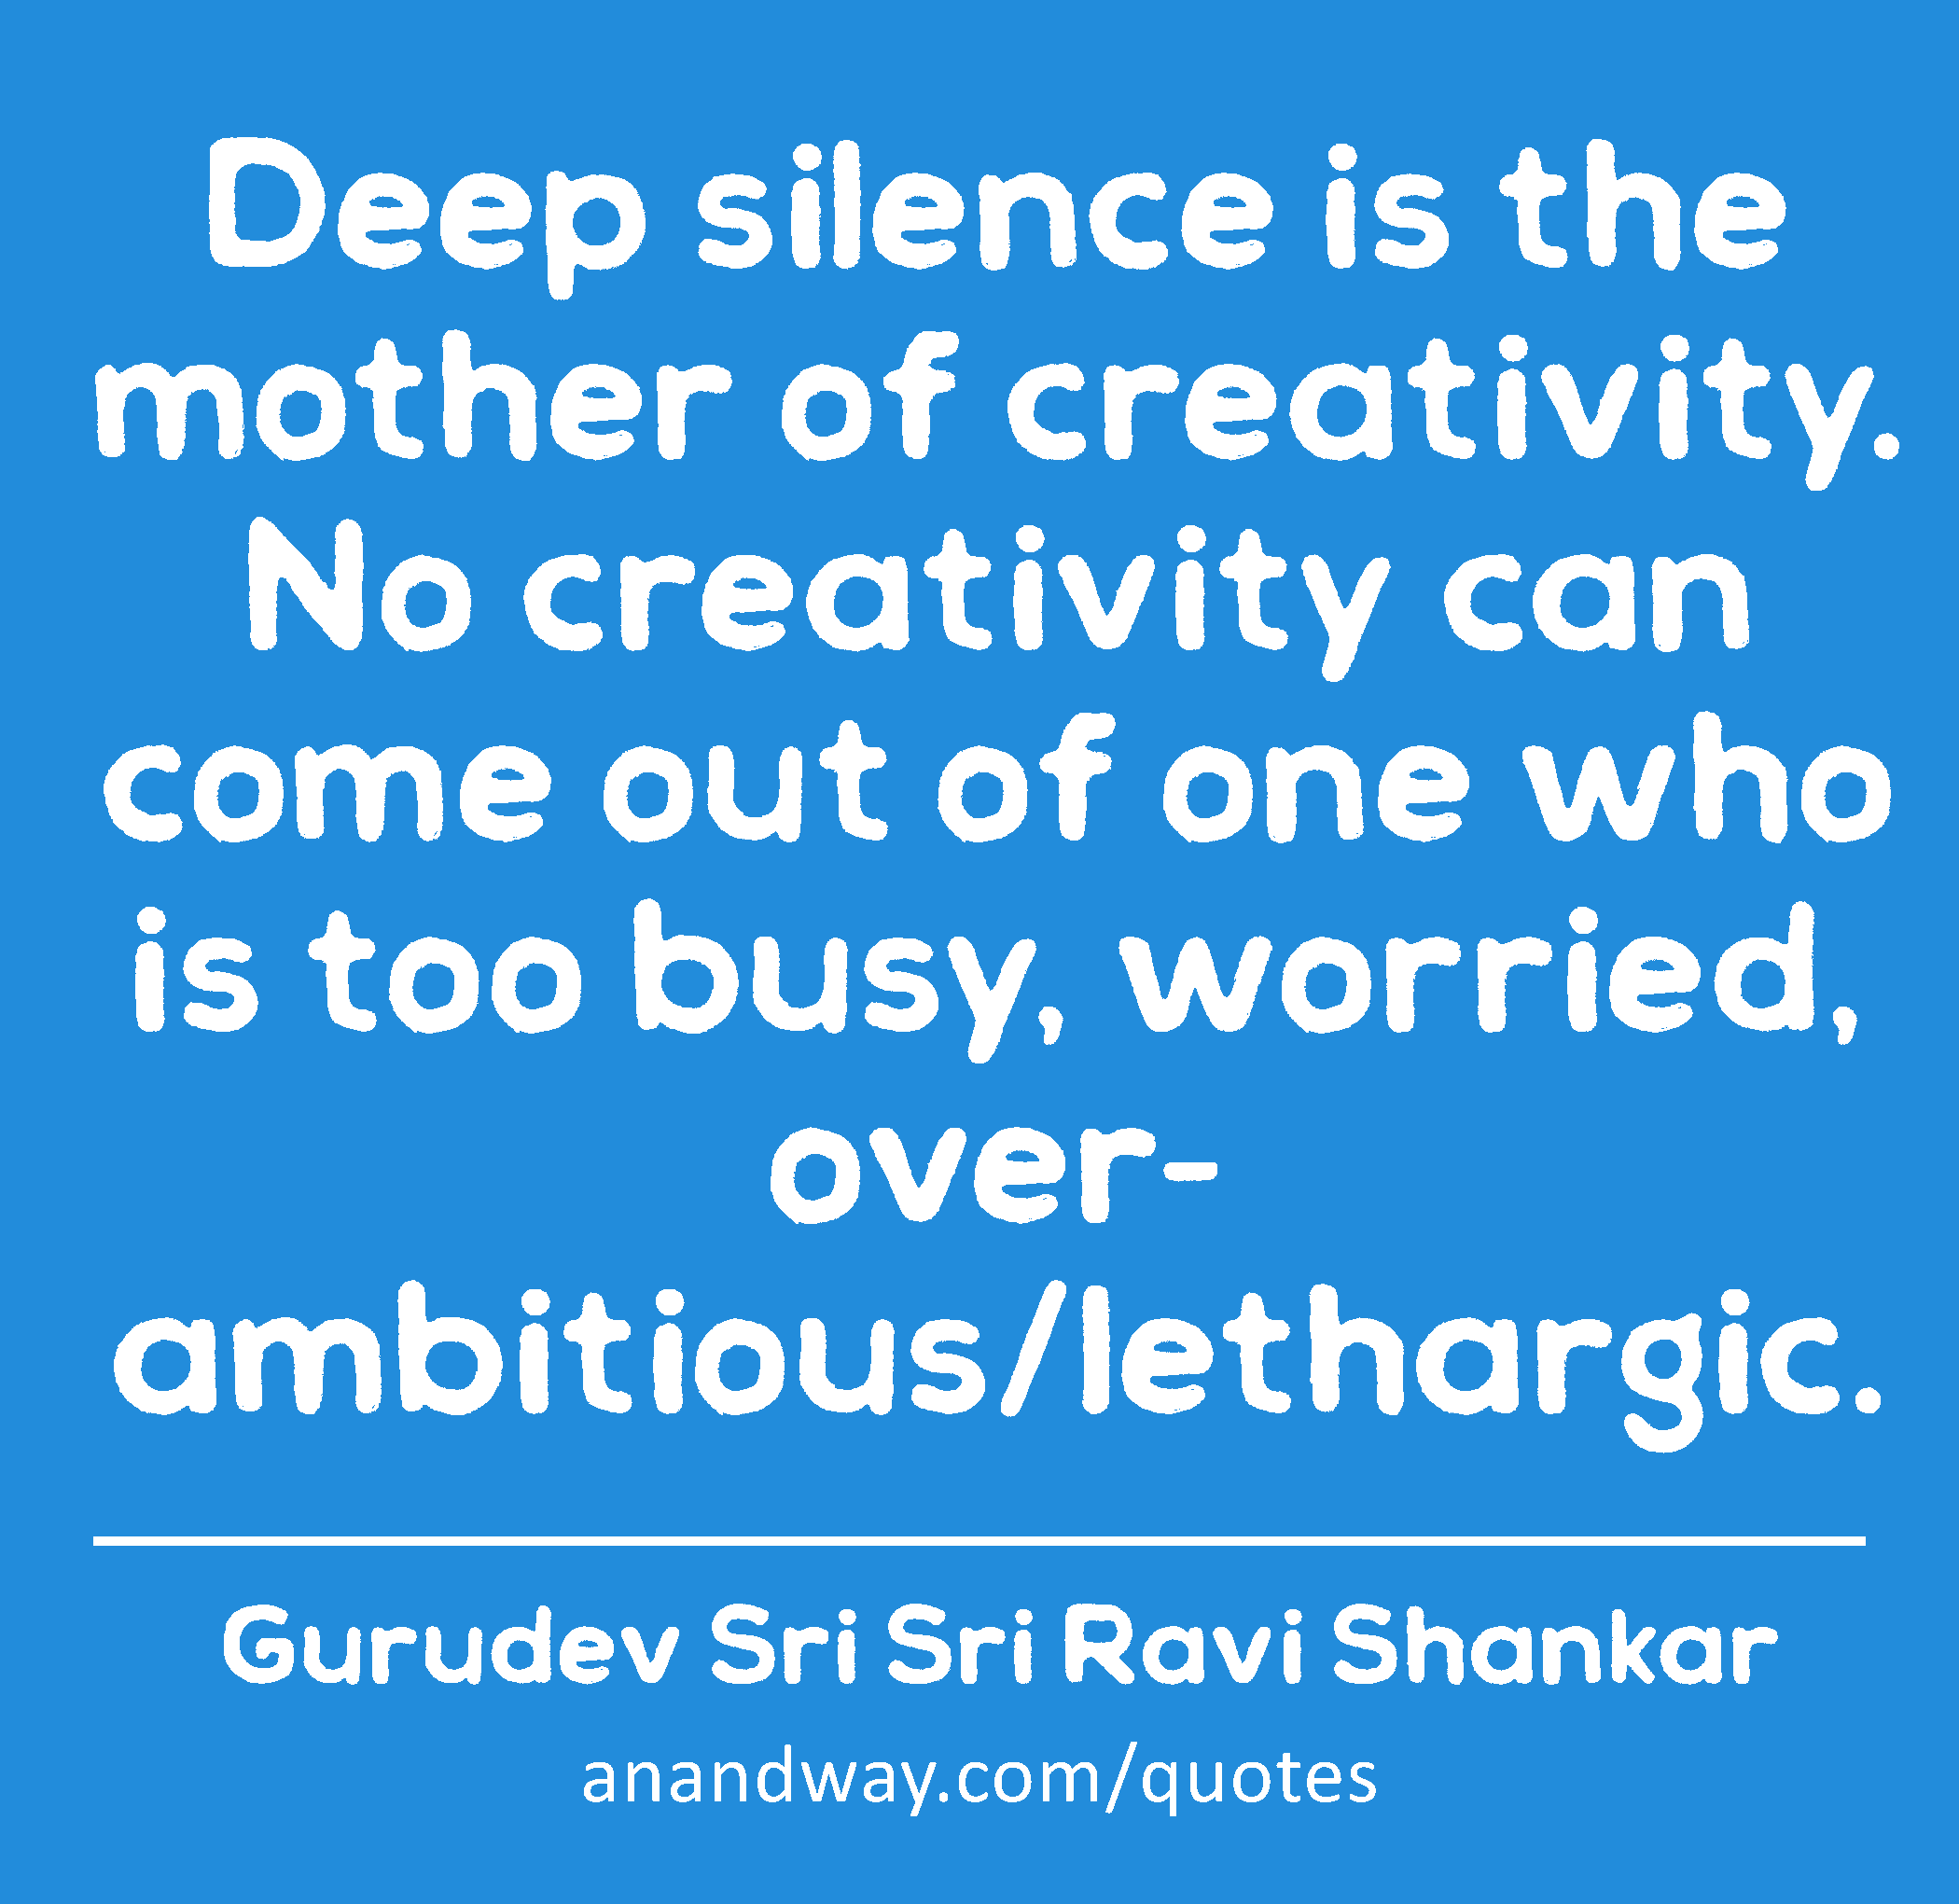 Deep silence is the mother of creativity. No creativity can come out of one who is too busy,
 -Gurudev Sri Sri Ravi Shankar